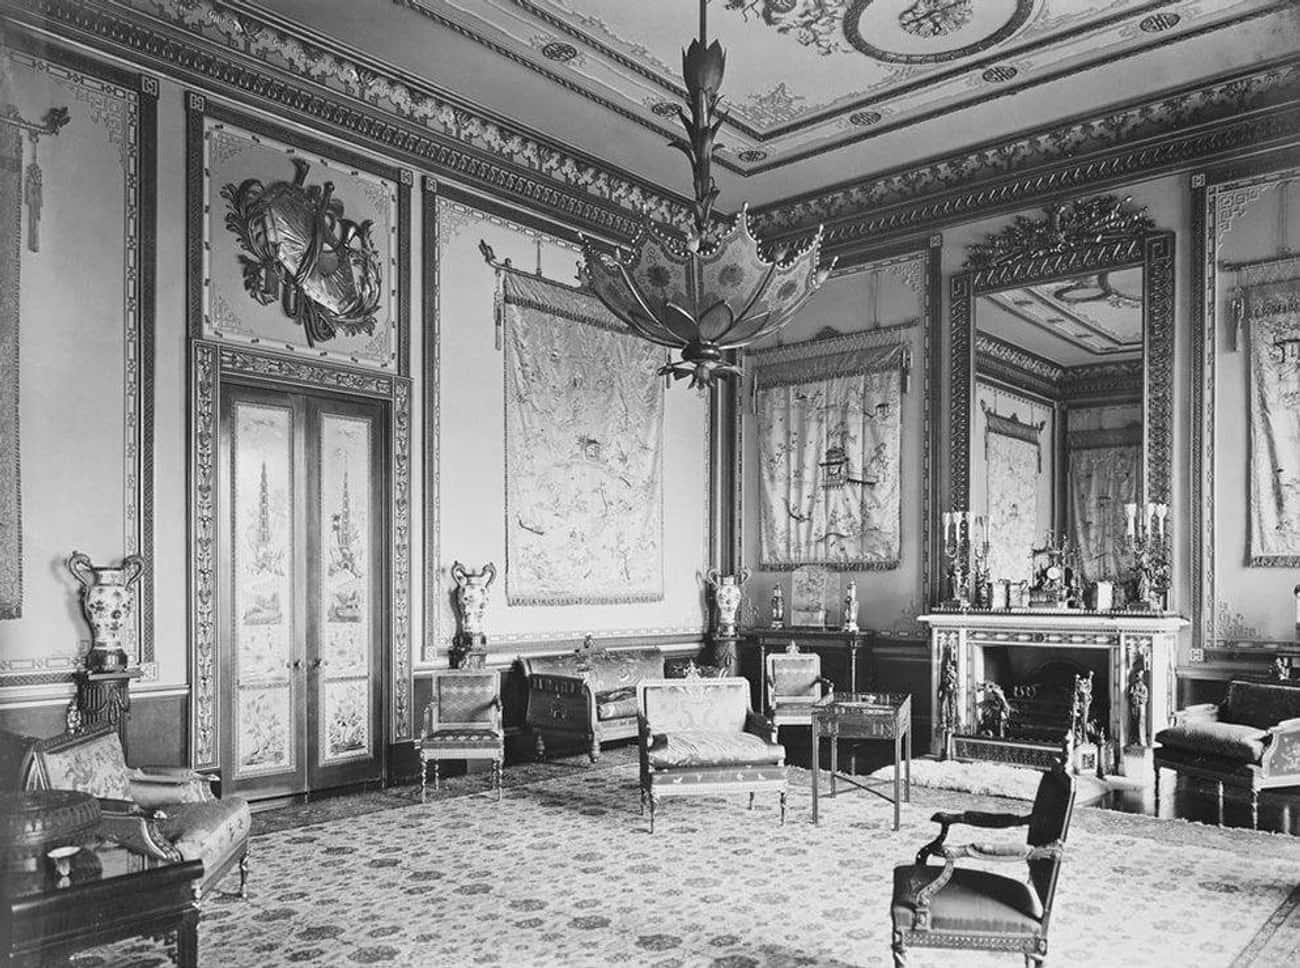 The Centre Room